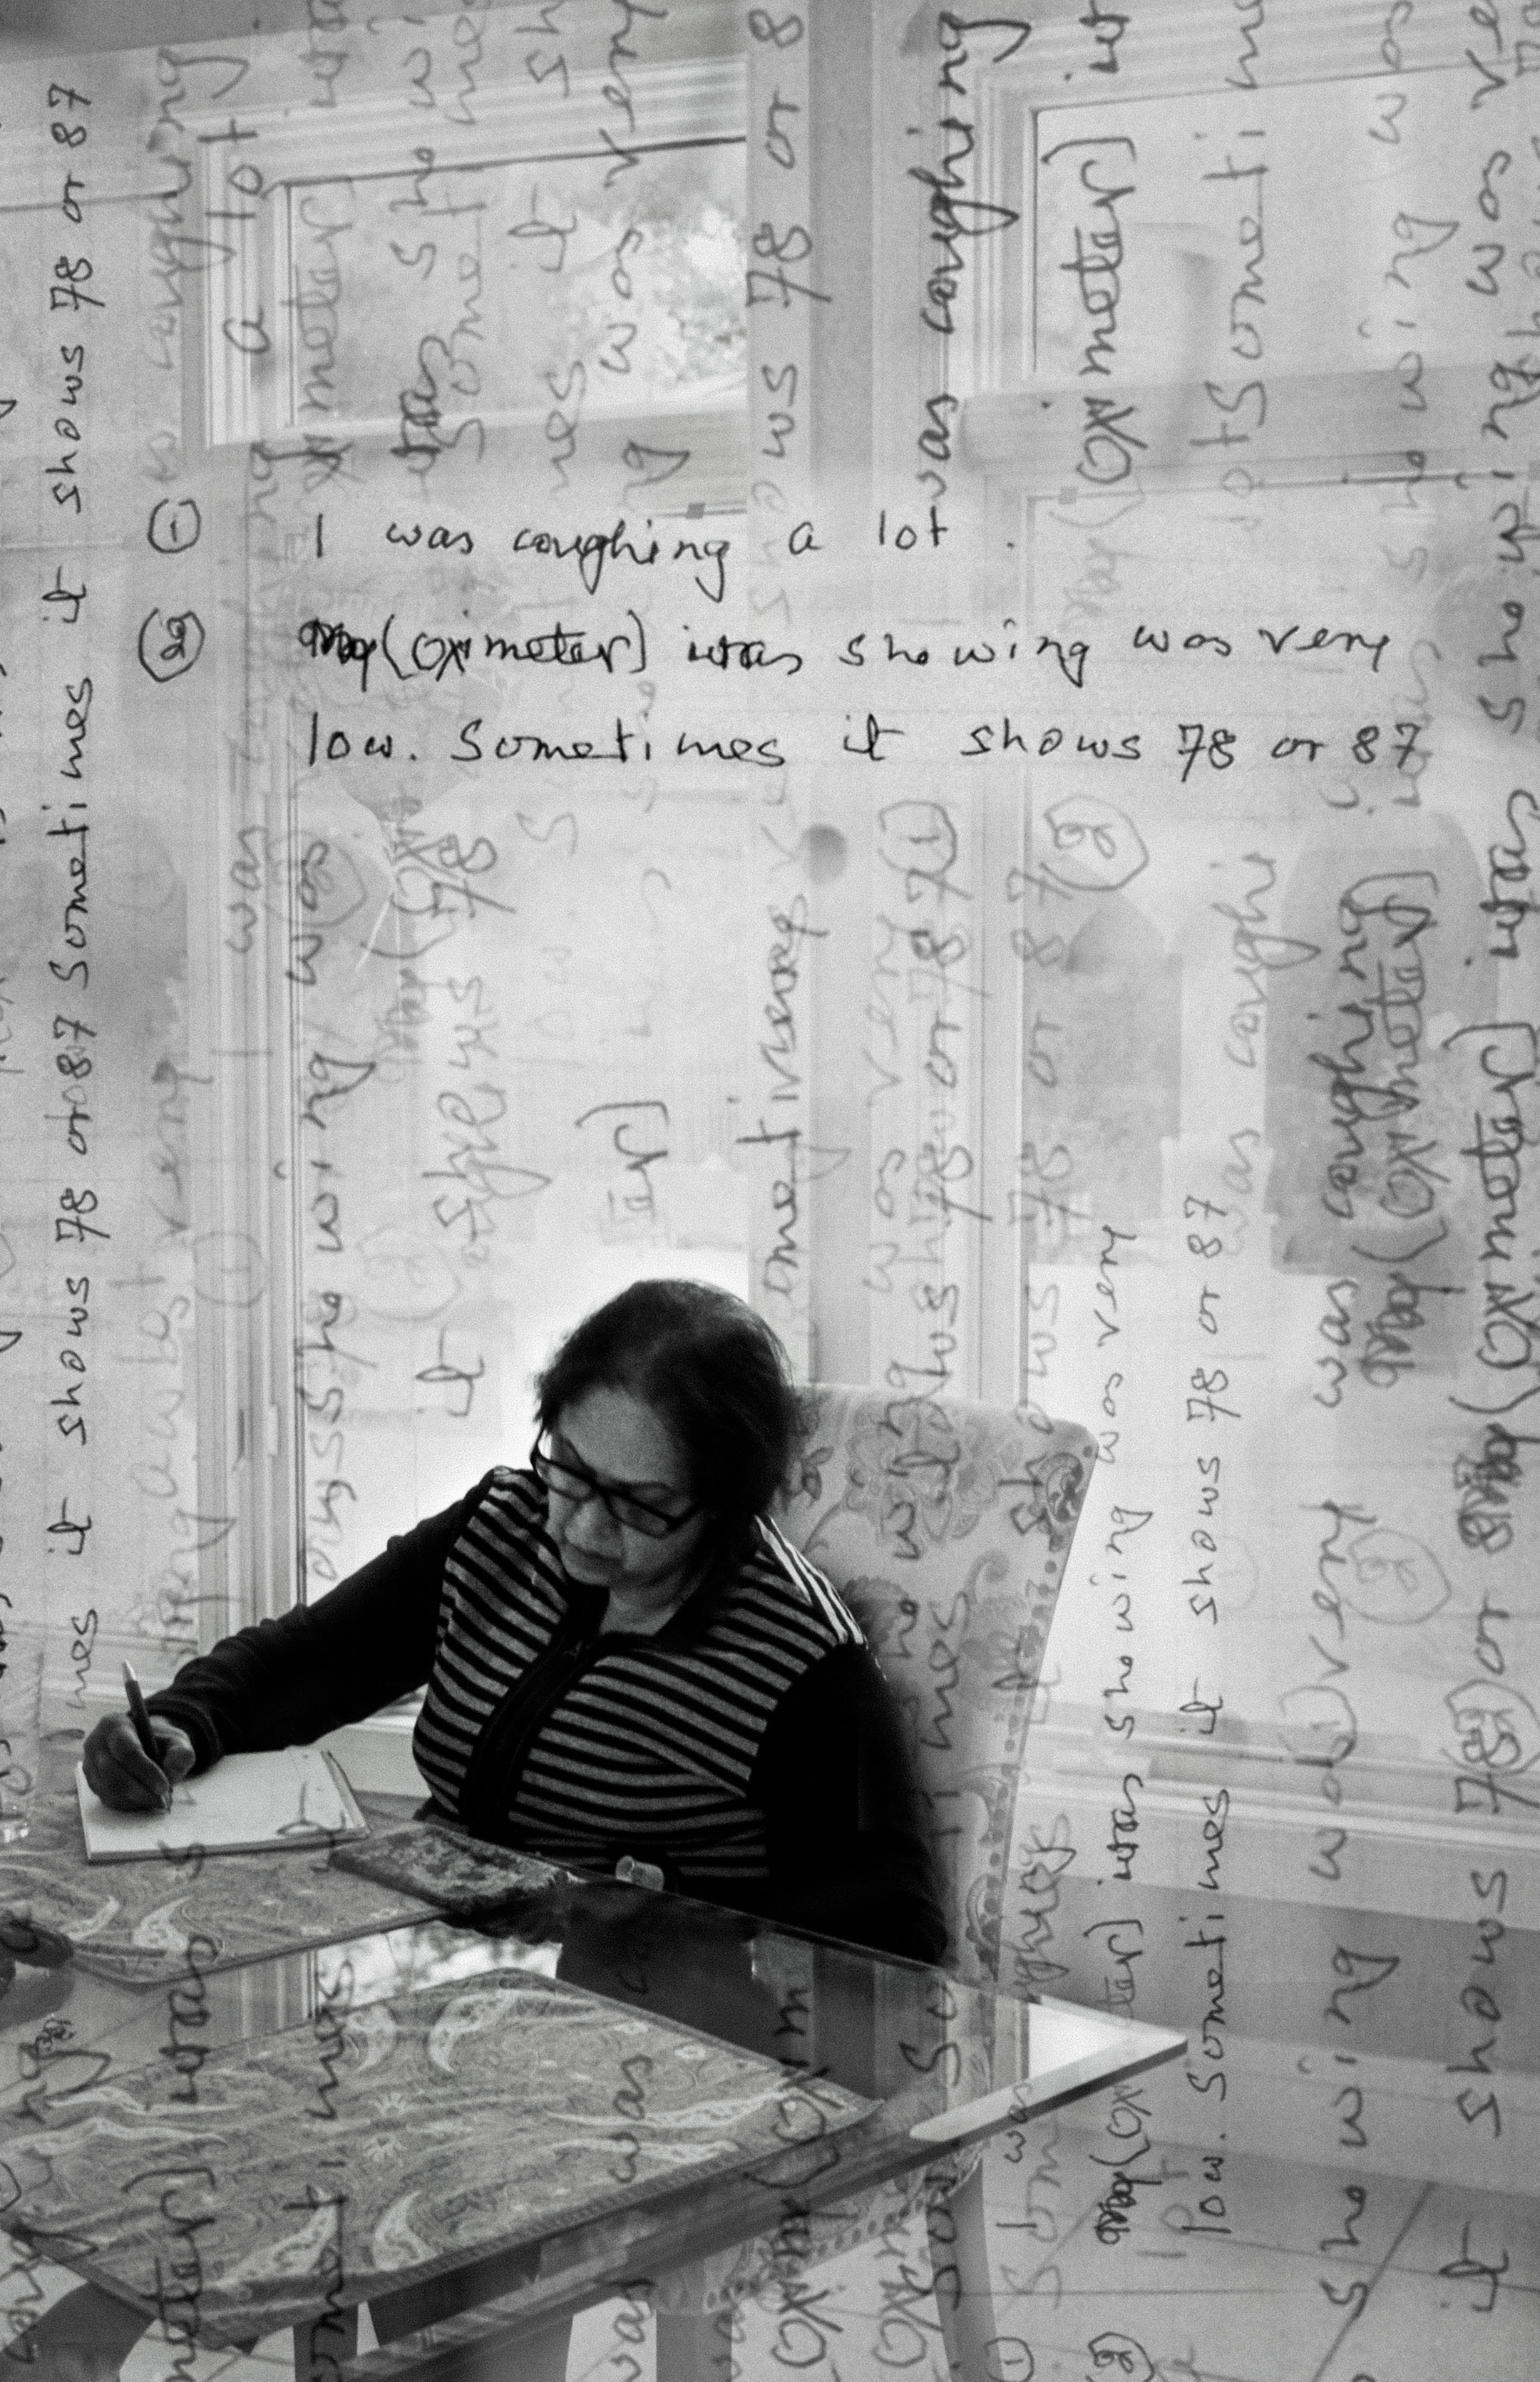 black and white photo of an older woman writing in a notebook while sitting at a table, with words and handwriting superimposed on the image